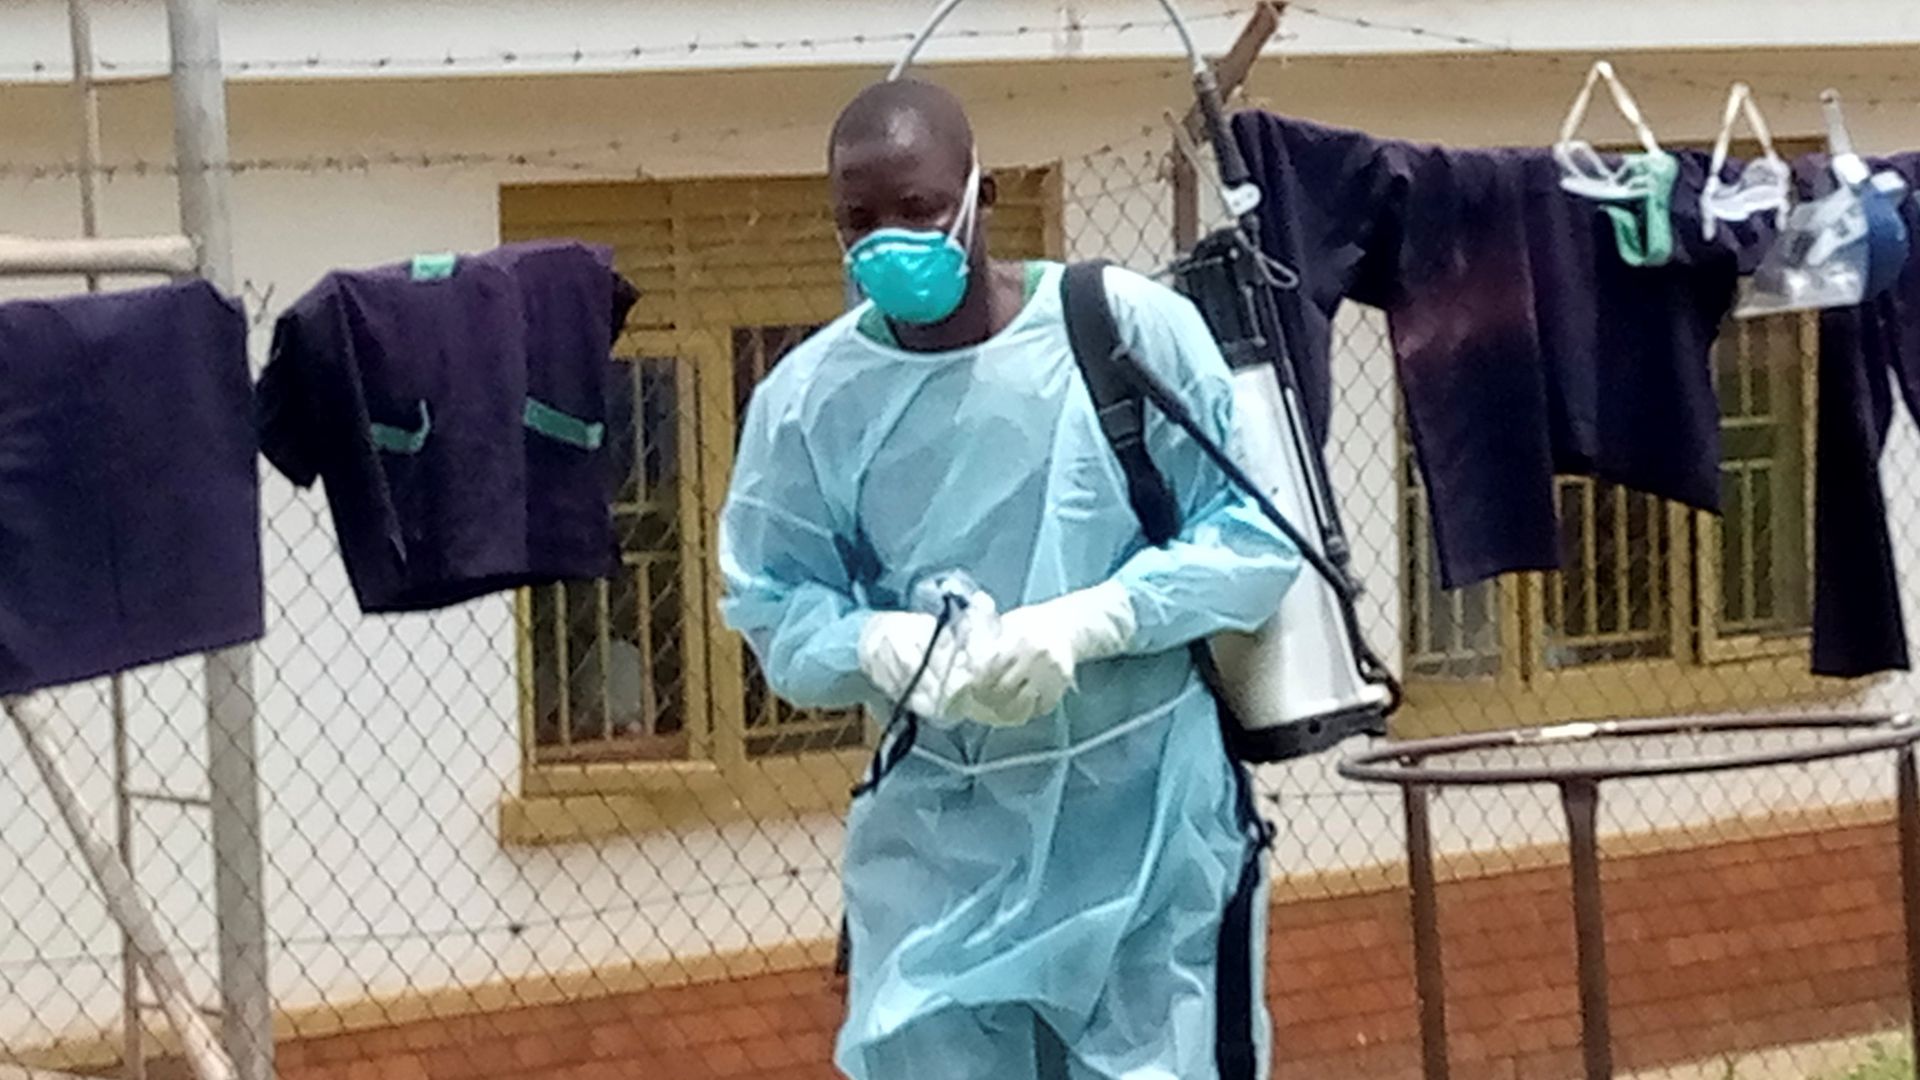 A medical worker is seen after disinfecting a demarcated Ebola treatment center at the Mubende Regional Hospital in Mubende District, Uganda.